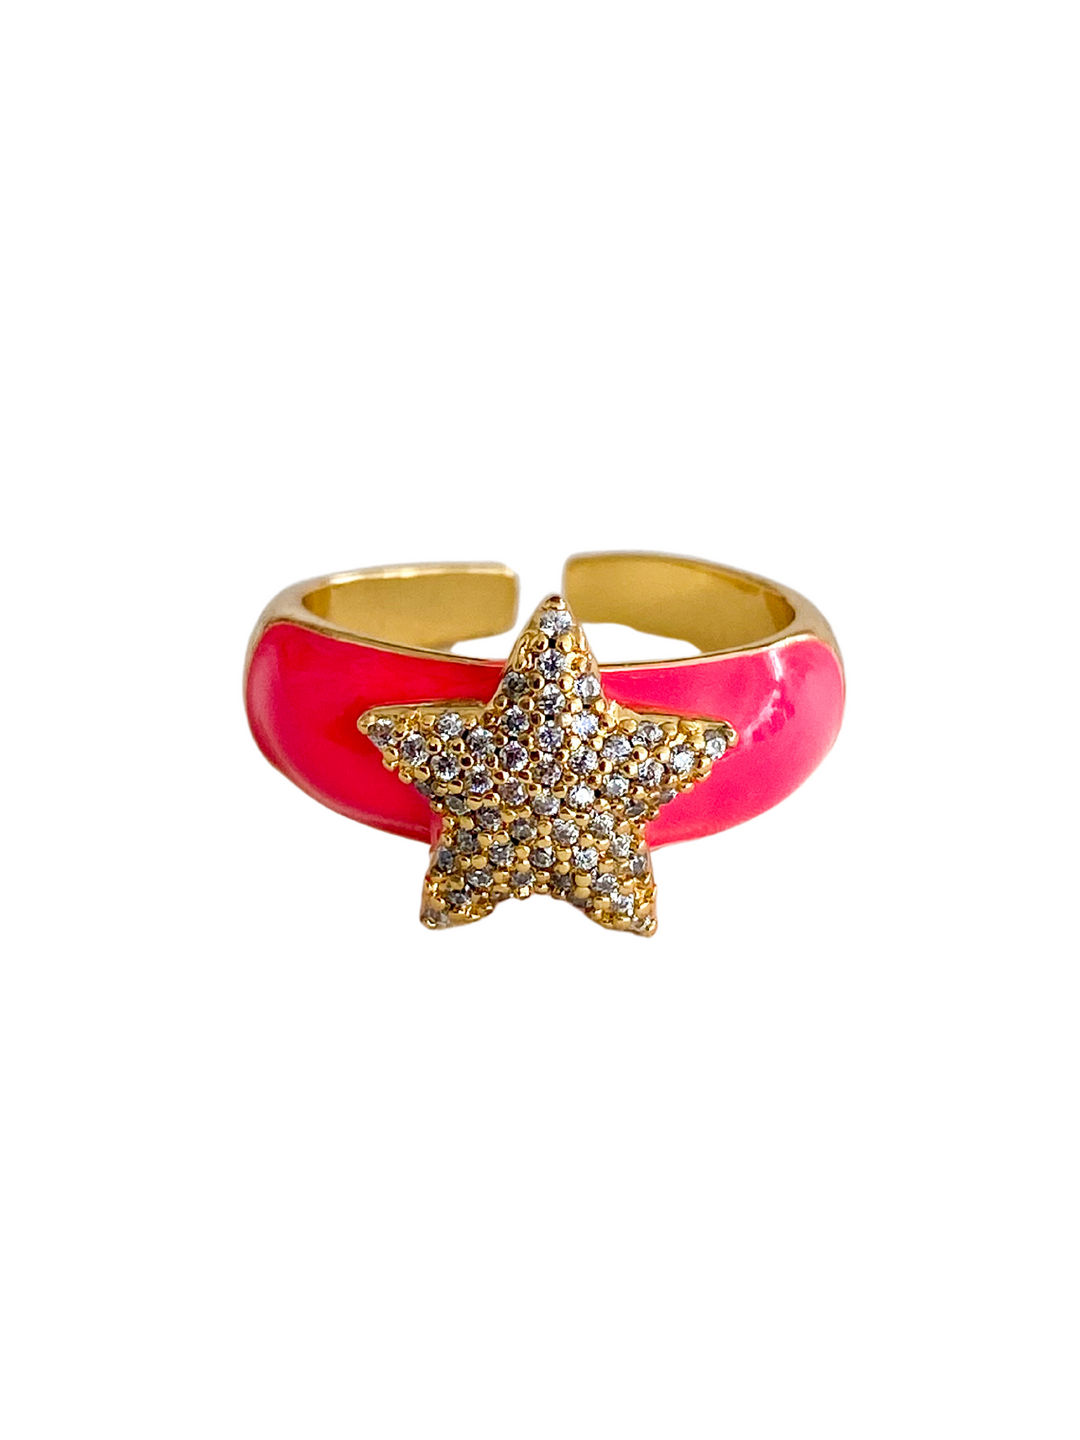 16K Gold Plated Star Ring